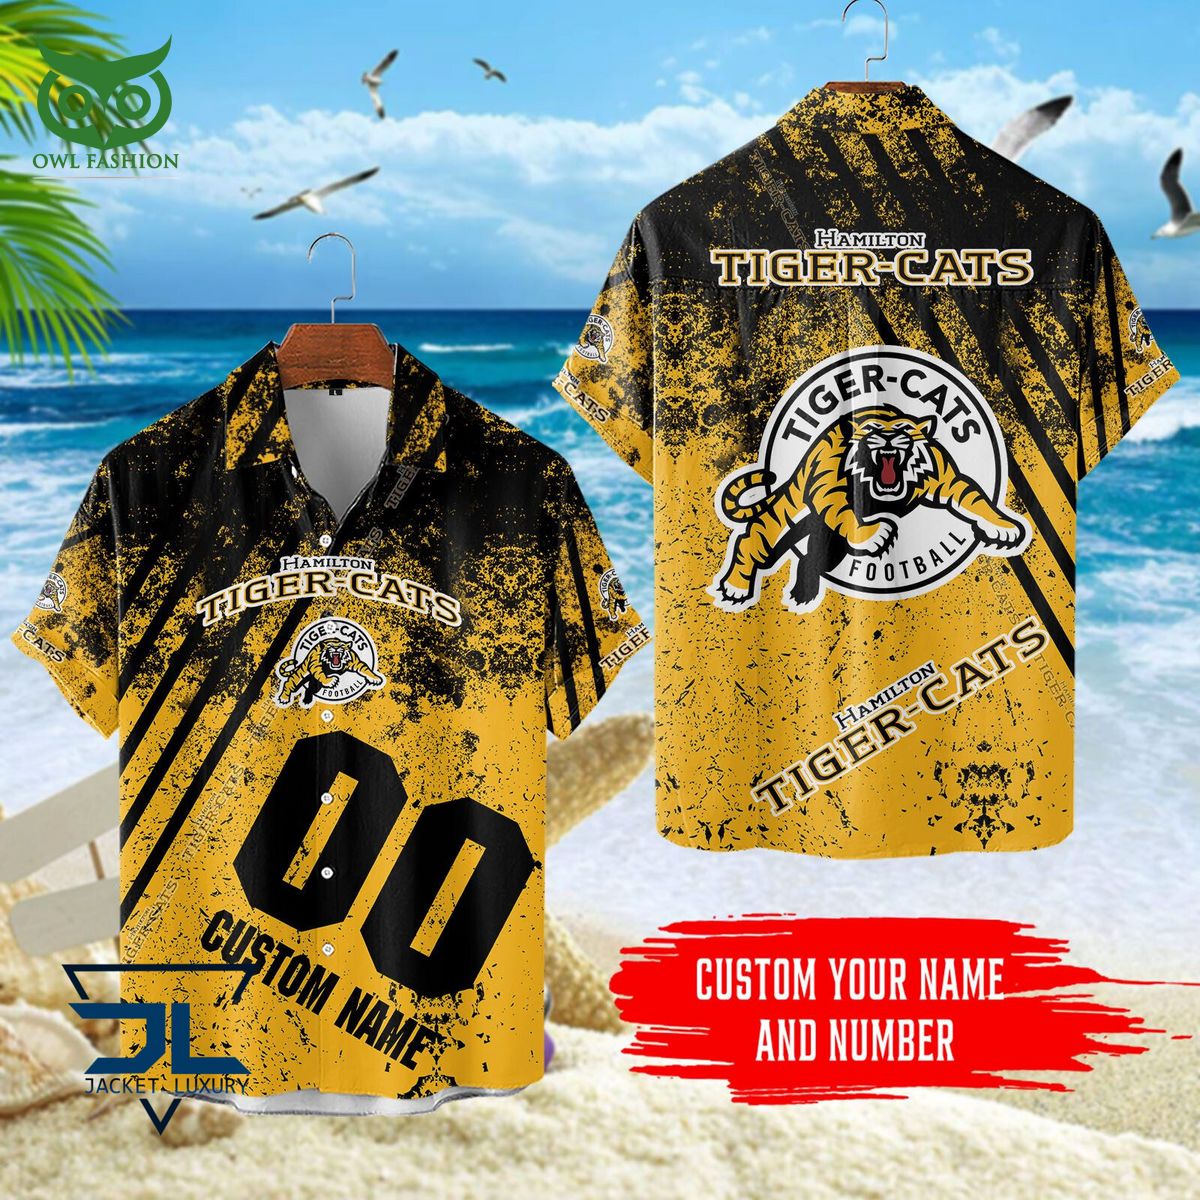 Hamilton Tiger-Cats Personalized Black Ugly Christmas Sweater